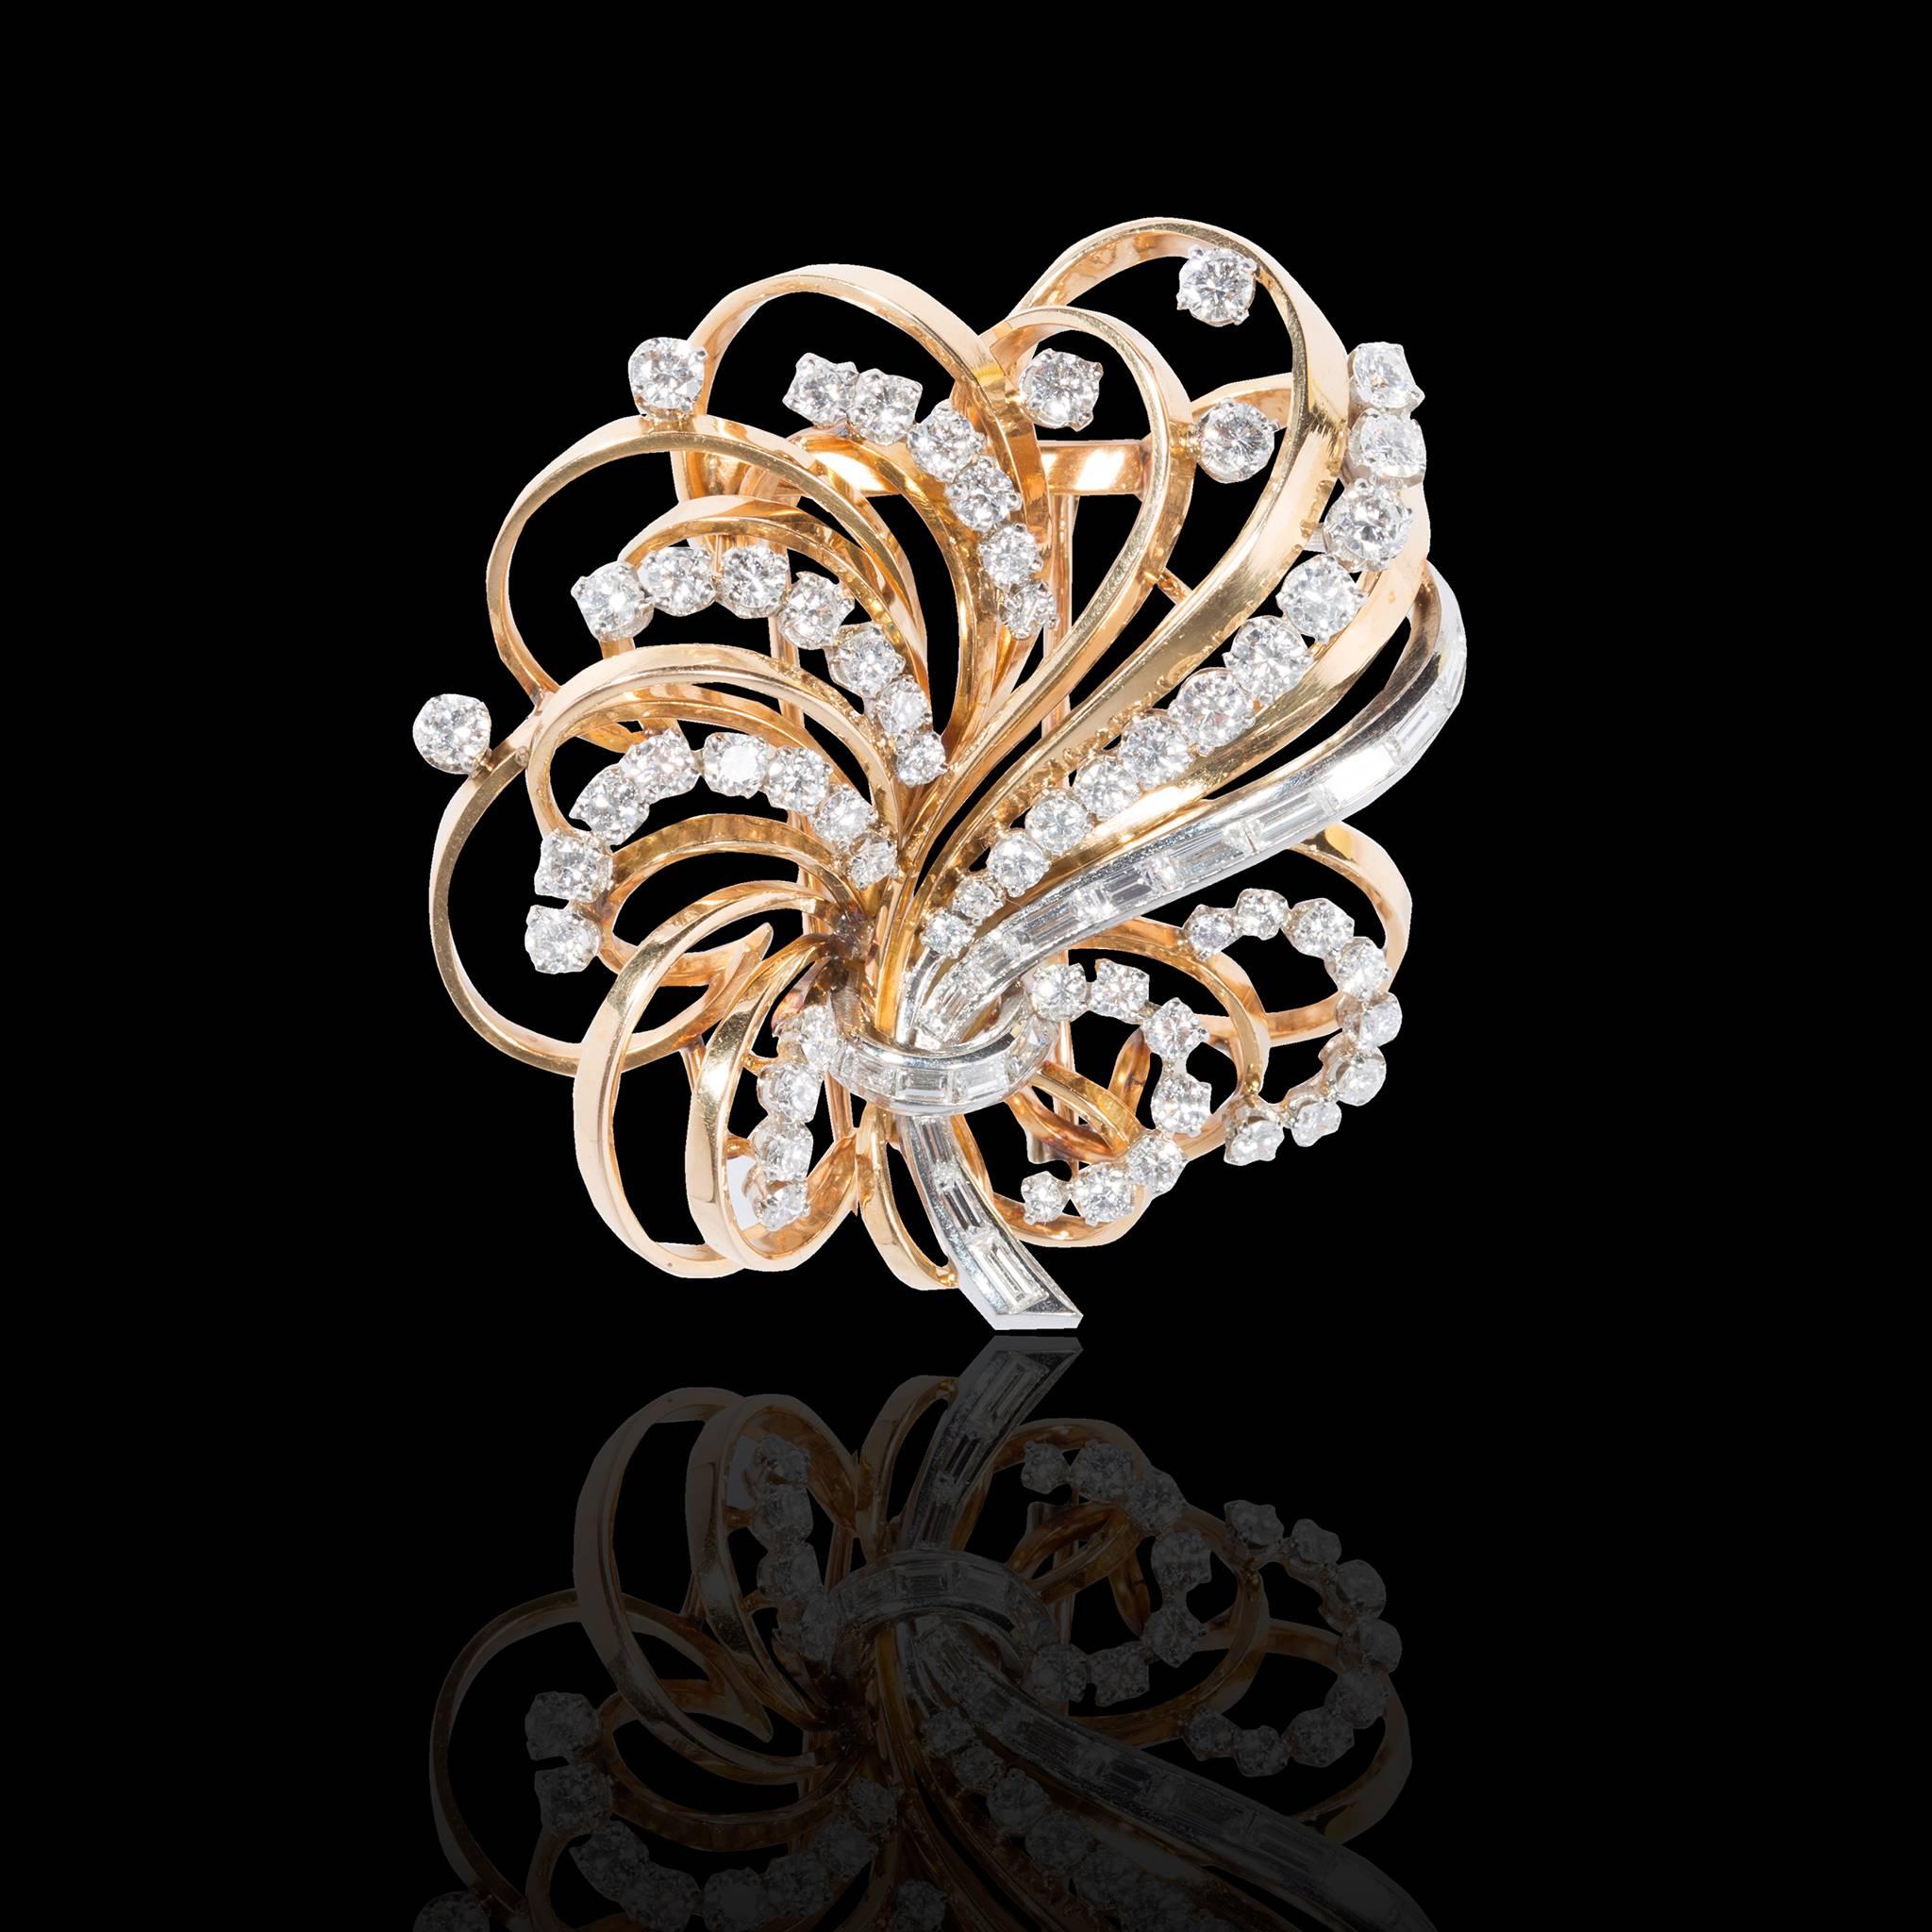 -Boucheron 1940's ,18 carat gold , platinum and diamonds' brooch-pendant forming a wreath set with brillant-cut diamonds in gradient and a rank of a pin baguette cut diamonds .
-57 brillant-cut diamonds .
-18 pin baguette diamonds.
-BOUCHERON is a